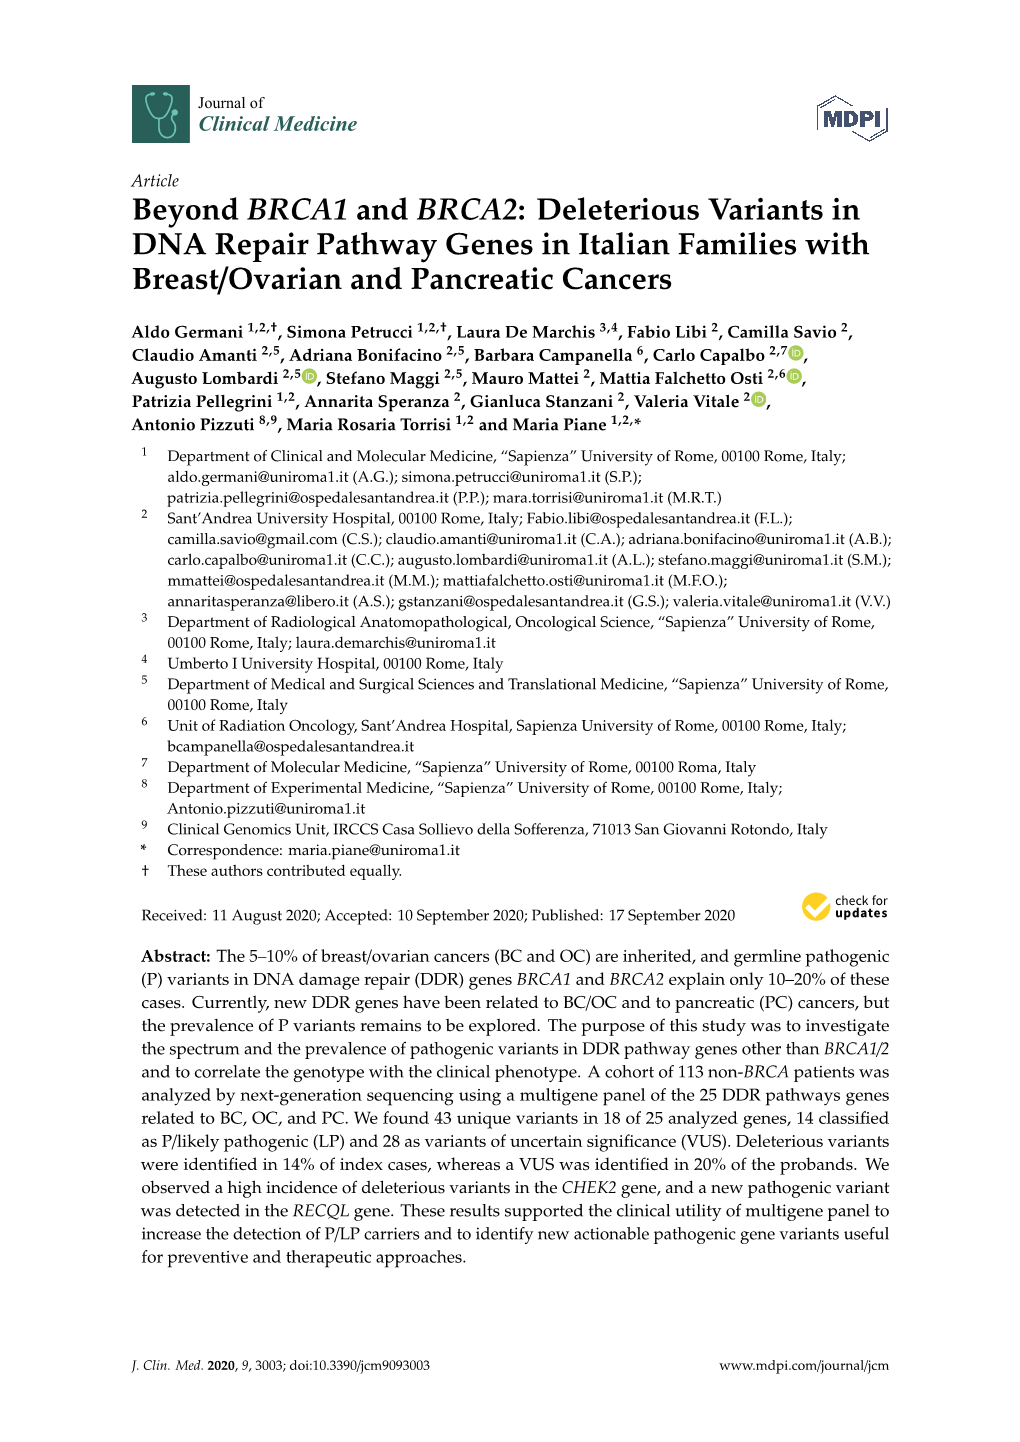 Beyond BRCA1 and BRCA2: Deleterious Variants in DNA Repair Pathway Genes in Italian Families with Breast/Ovarian and Pancreatic Cancers